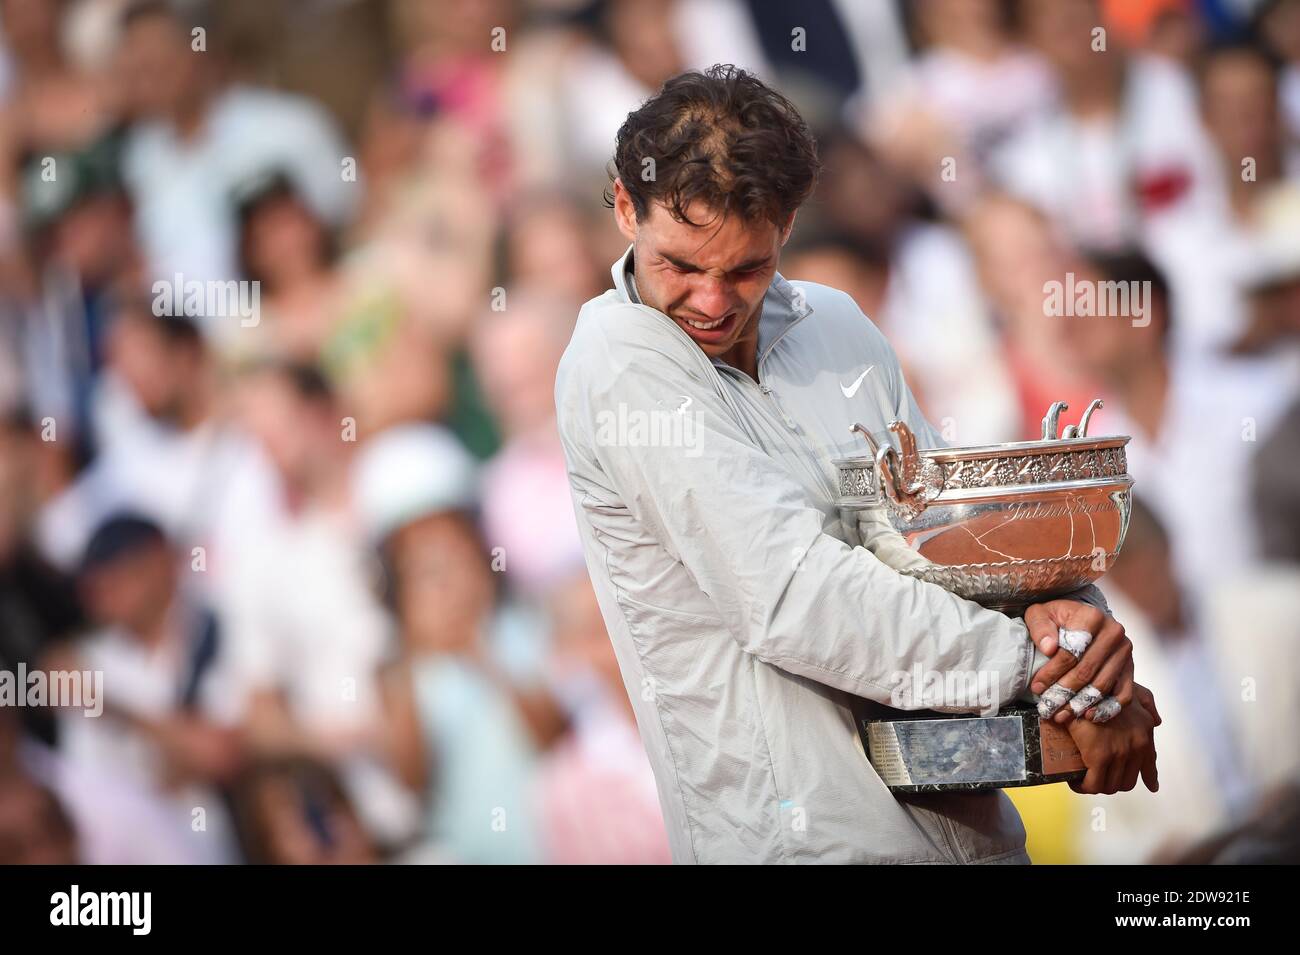 Rafael Nadal celebrates his victory during the final match of the French  Tennis Open at Roland-Garros arena in Paris, France on June 8, 2014. Photo  by Nicolas Gouhier/ABACAPRESS.COM Stock Photo - Alamy